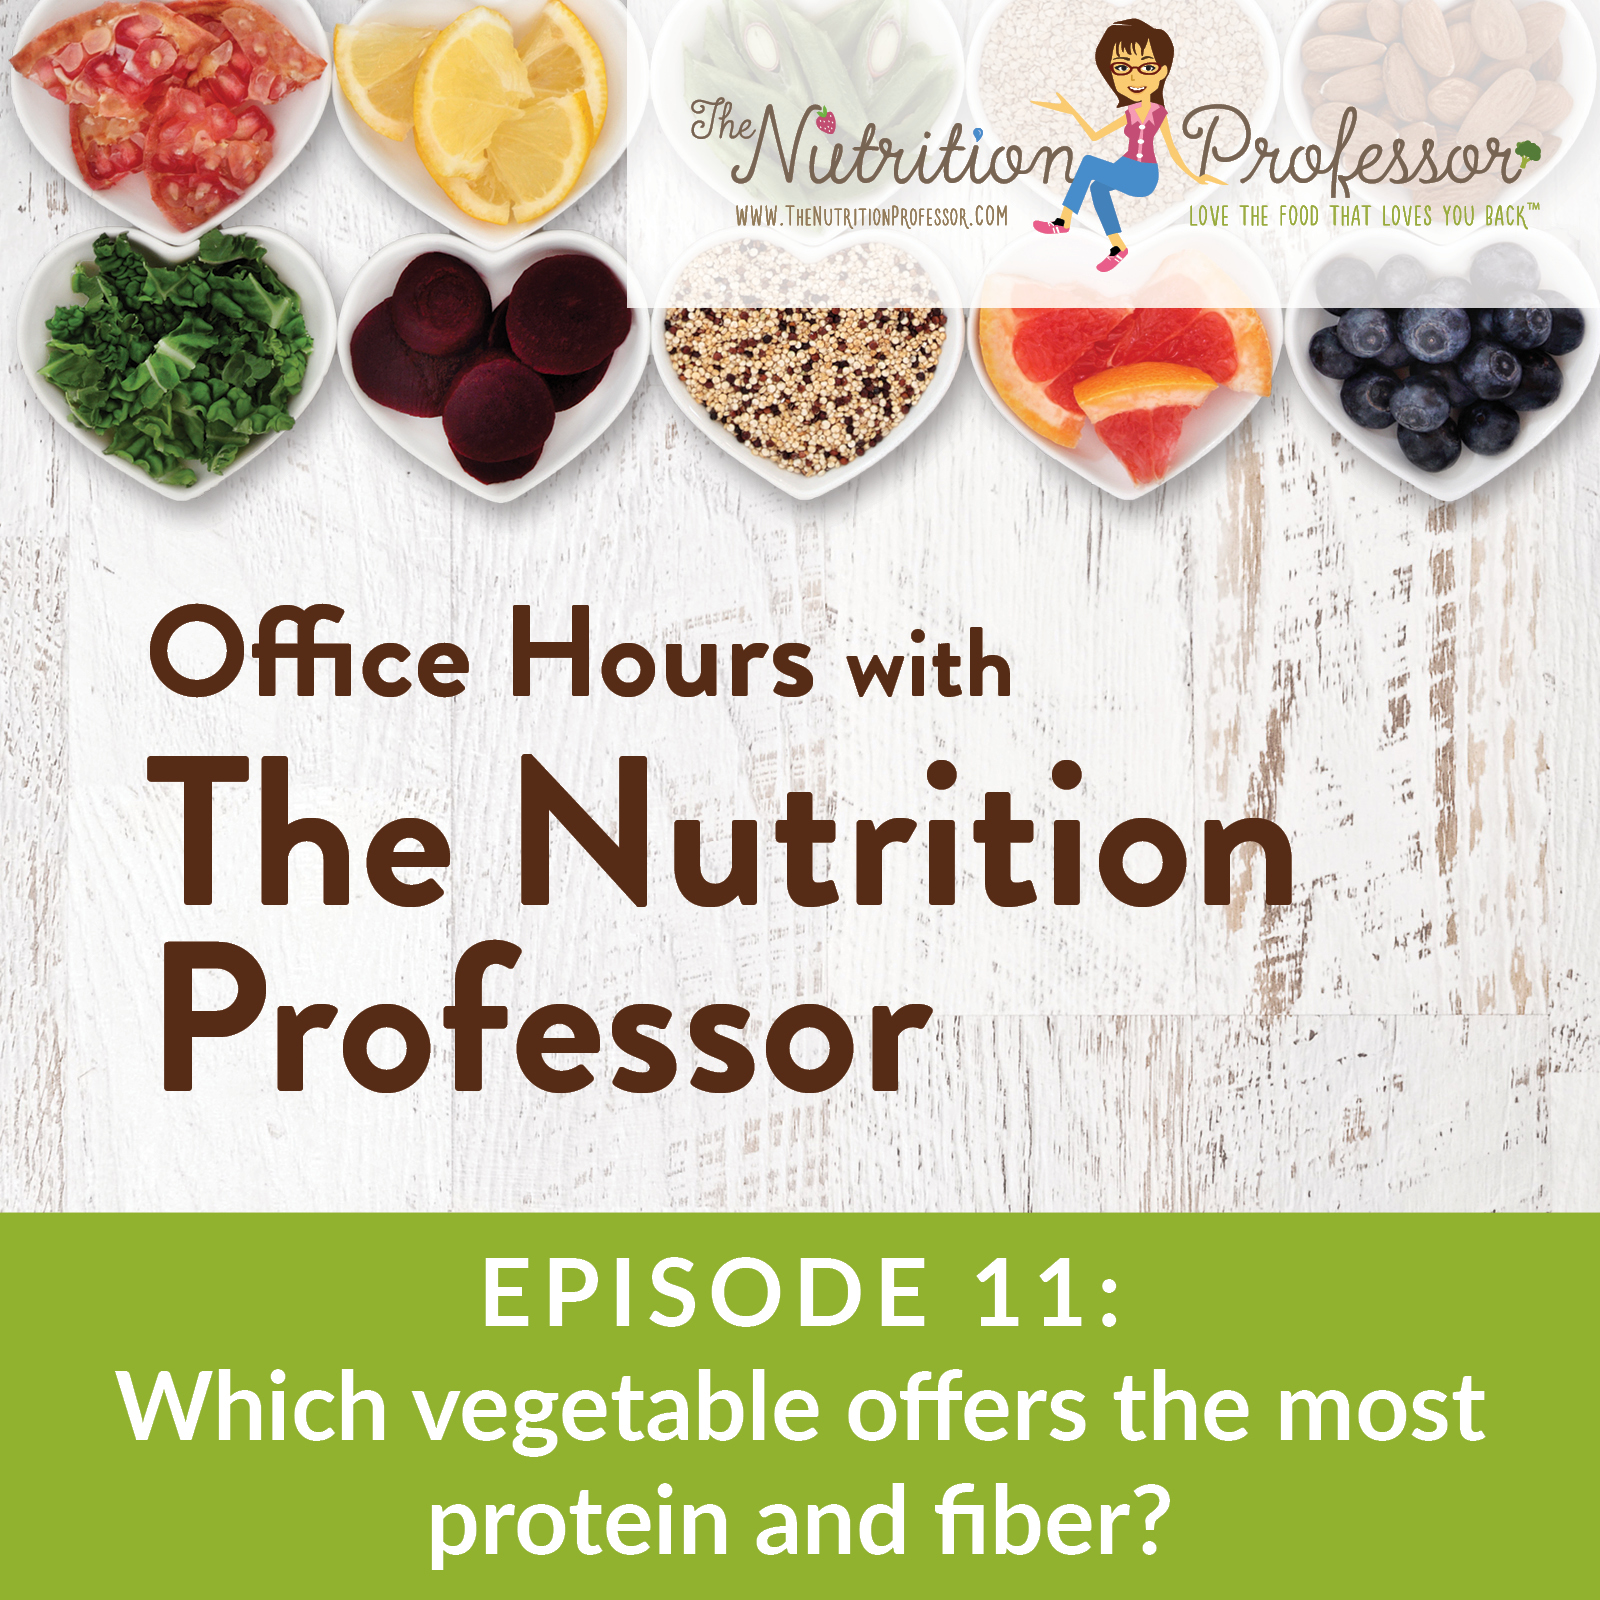 Podcast Episode 11: Trivia time – Which vegetable offers the most protein and fiber?